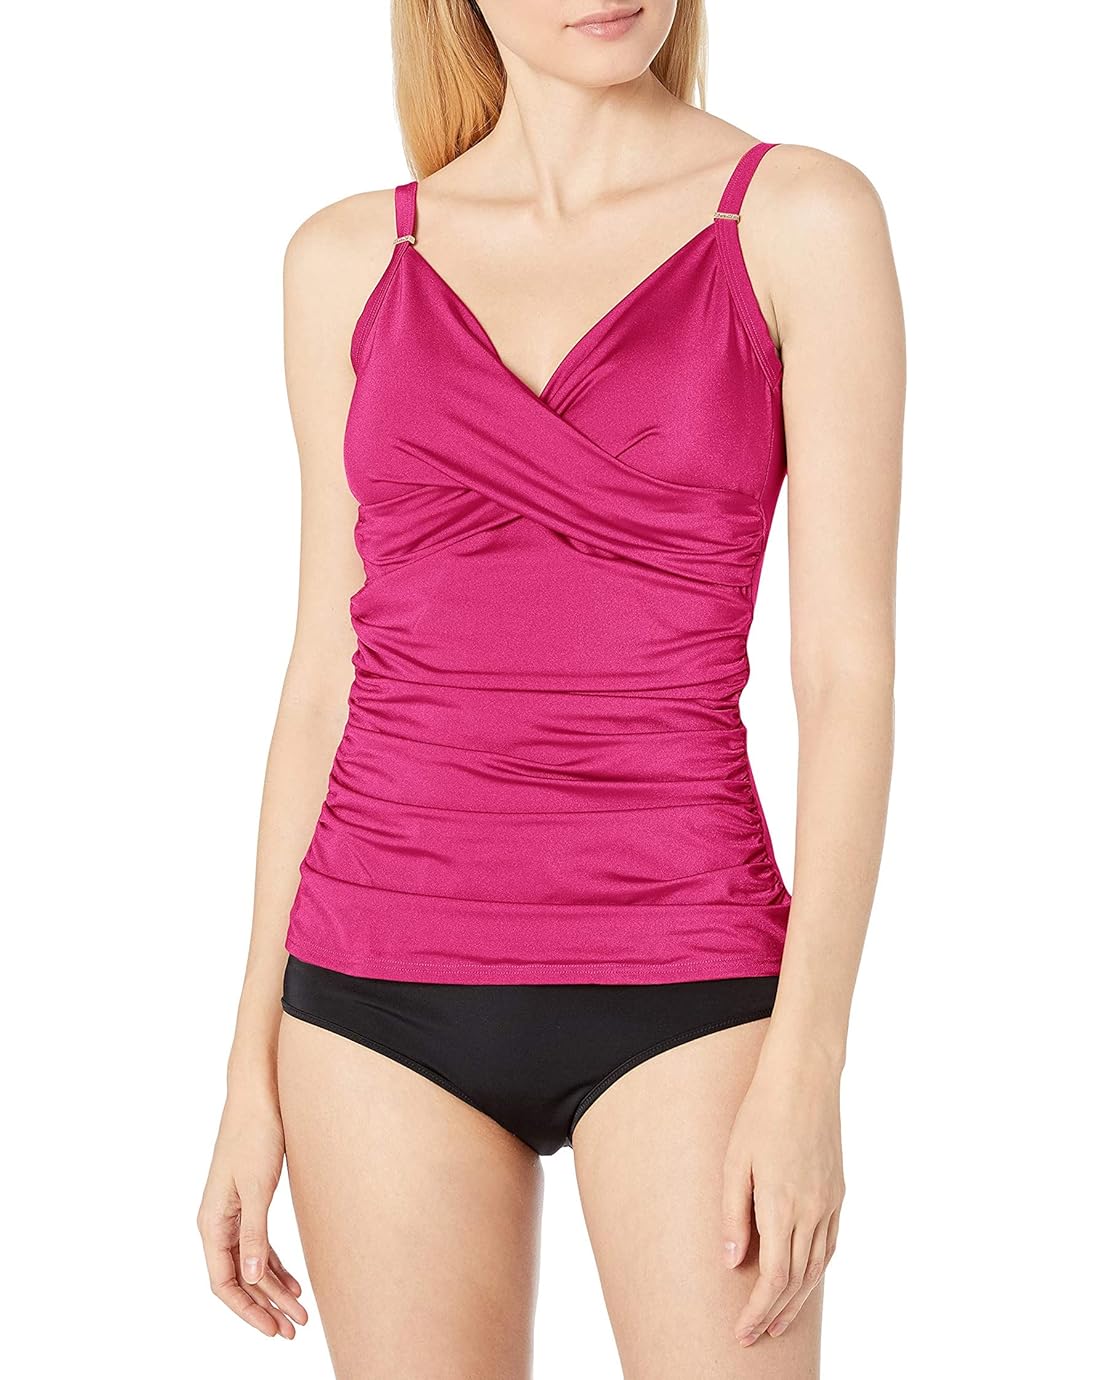 Calvin Klein Womens Standard Tankini Swimsuit with Adjustable Straps and Tummy Control